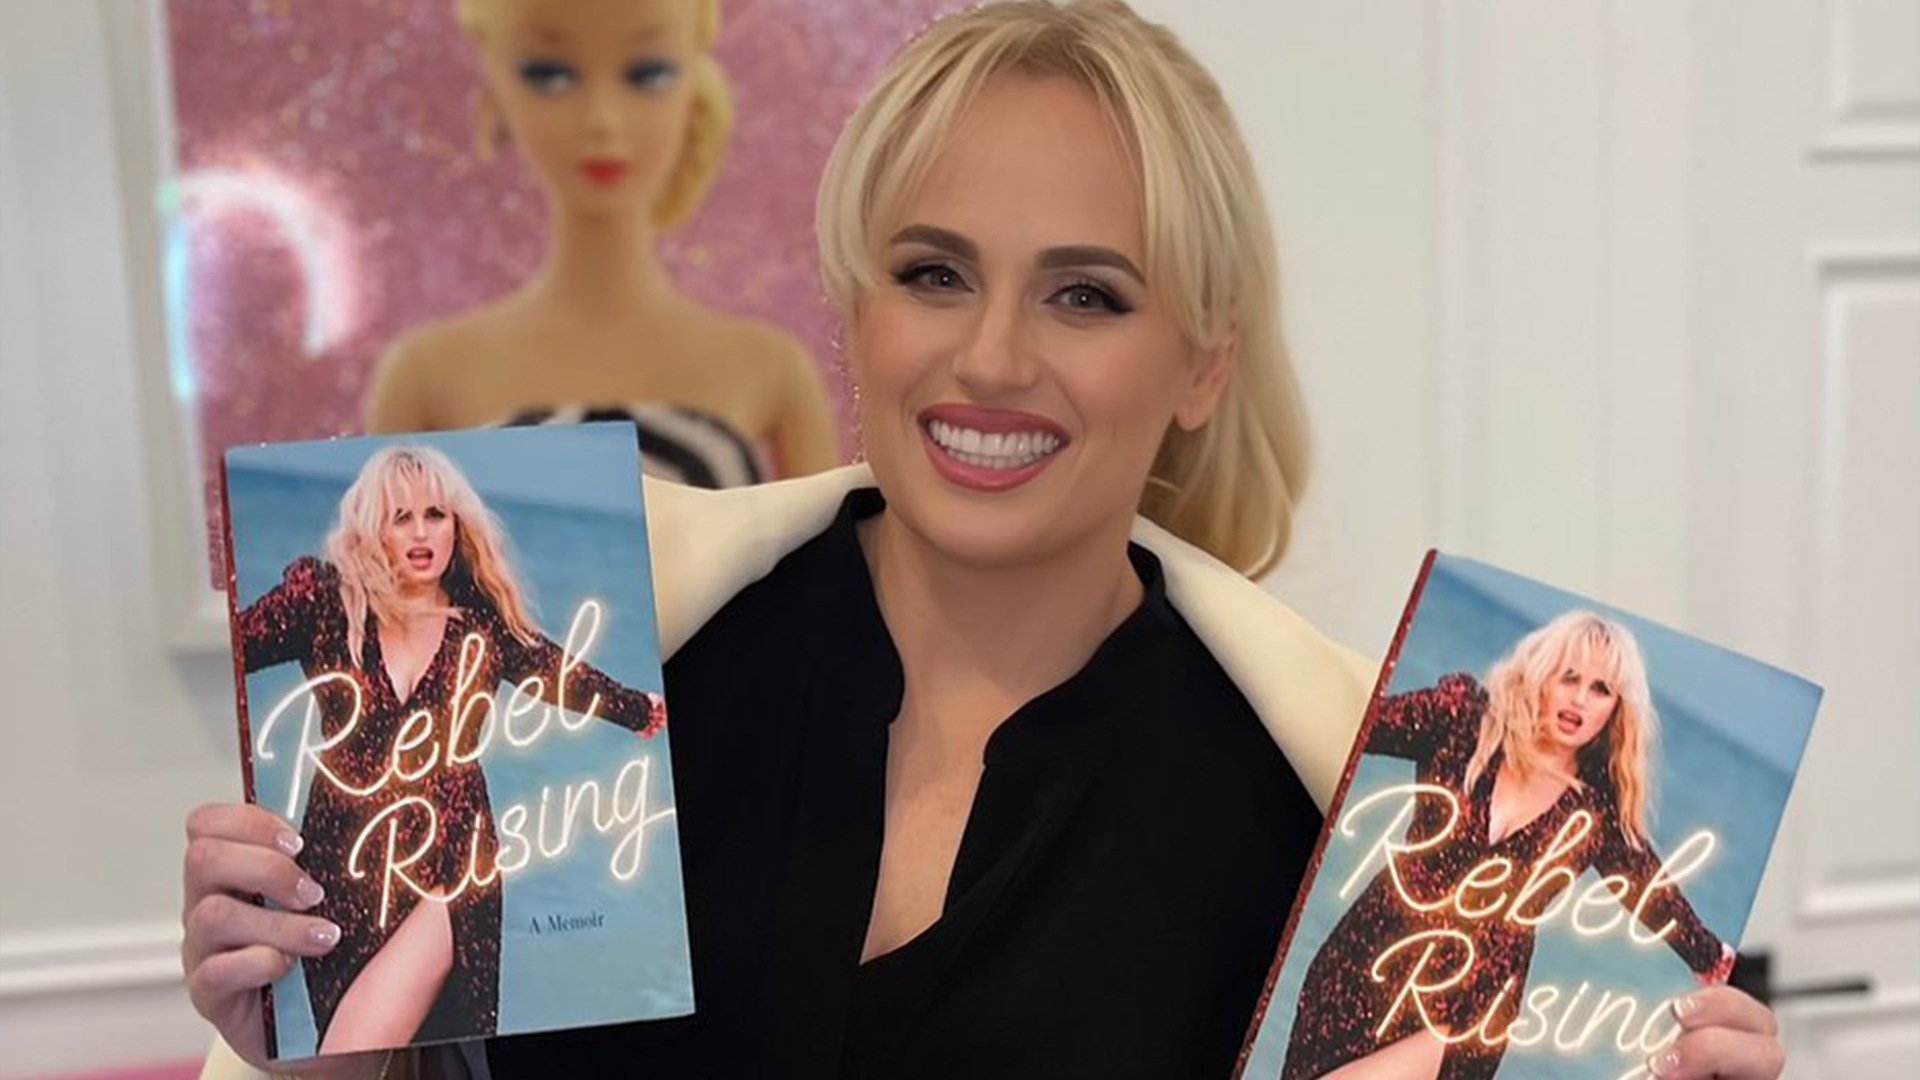 Rebel Wilson leaks name of A-list actor she claims ‘threatened’ her over tell-all book in now-deleted Instagram post